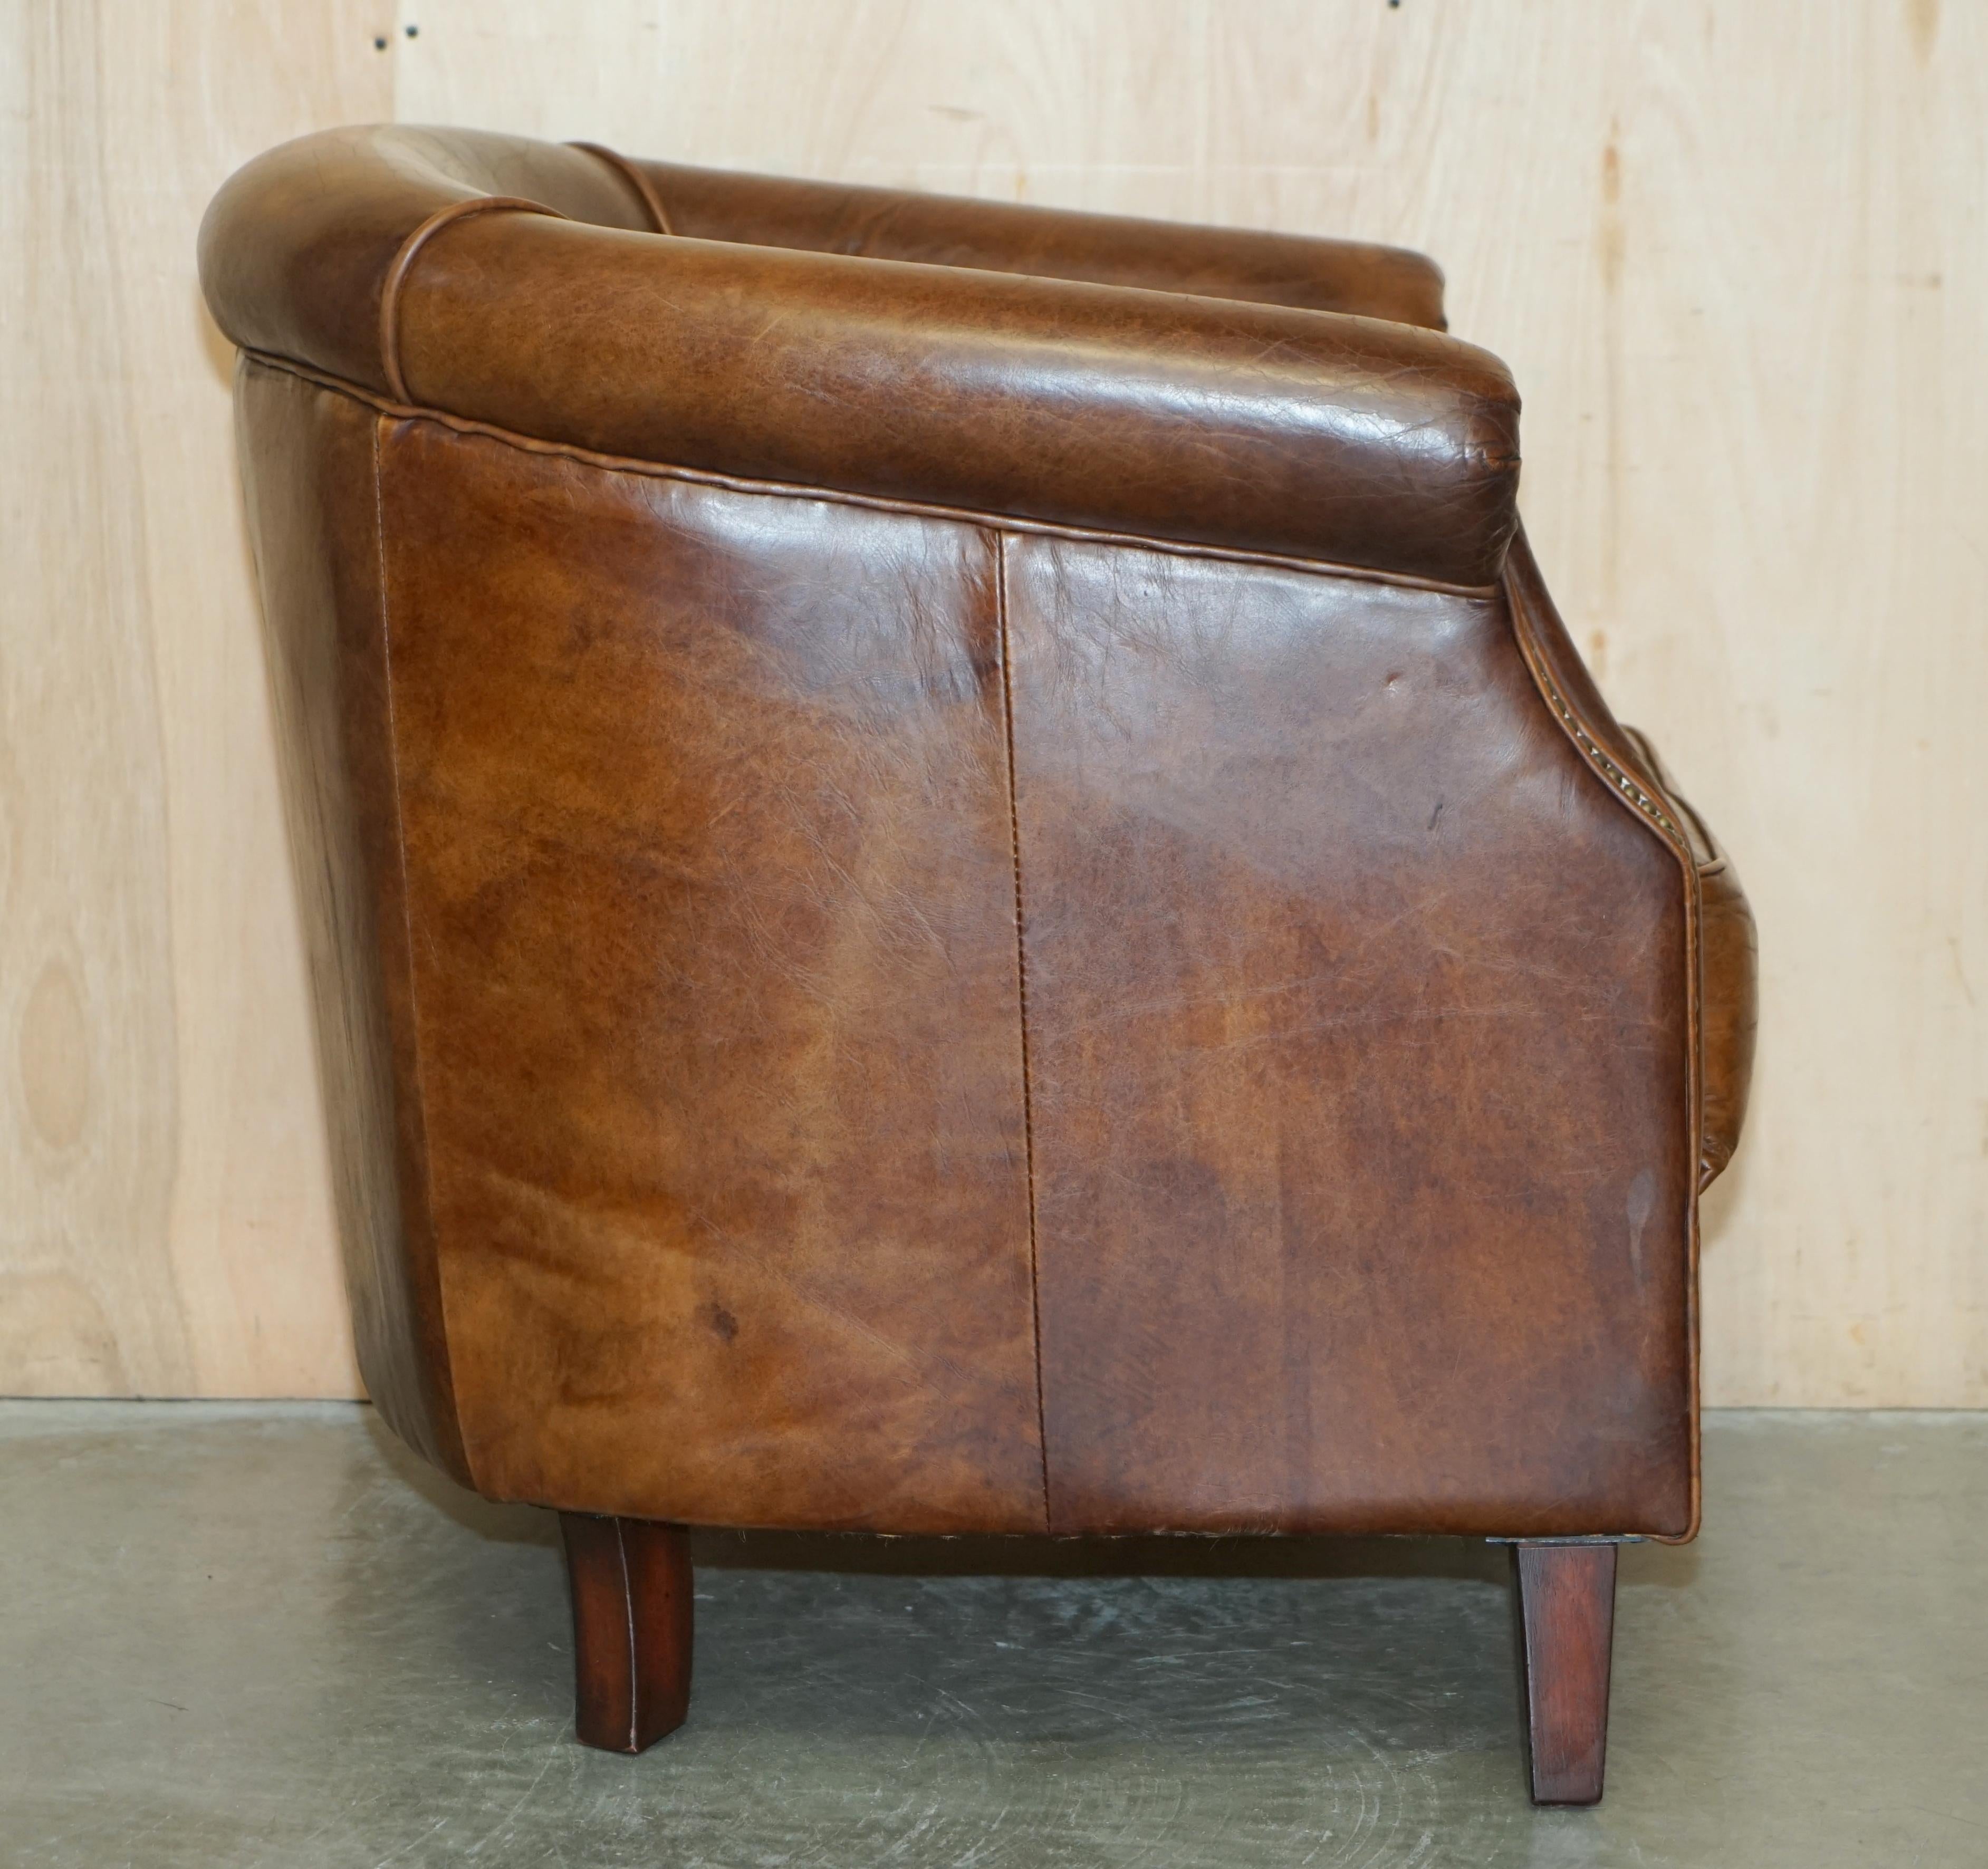 AGED HERiTAGE BROWN LEATHER BIKER TAN CLUB TUB ARMCHAIR MUST SEE LOVELY PATINa!! im Angebot 6